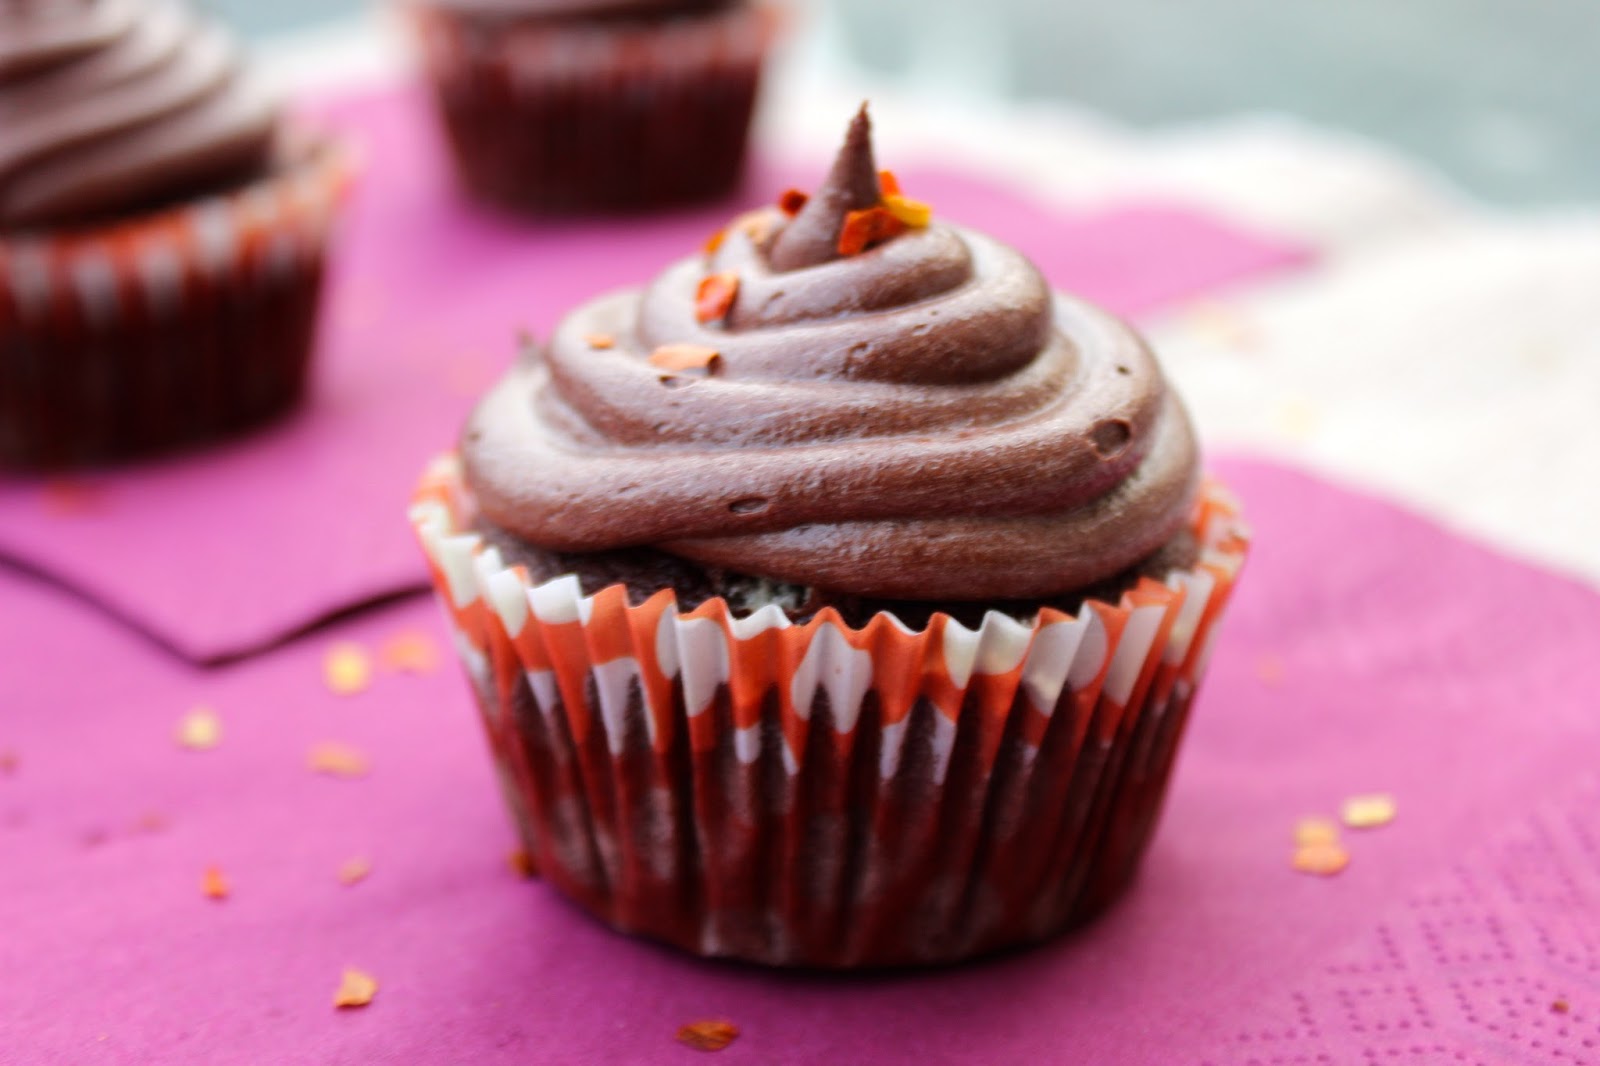 &amp;quot;Hot&amp;quot; Chocolate Cupcakes with Chocolate Frosting - Hot Chocolate Hits